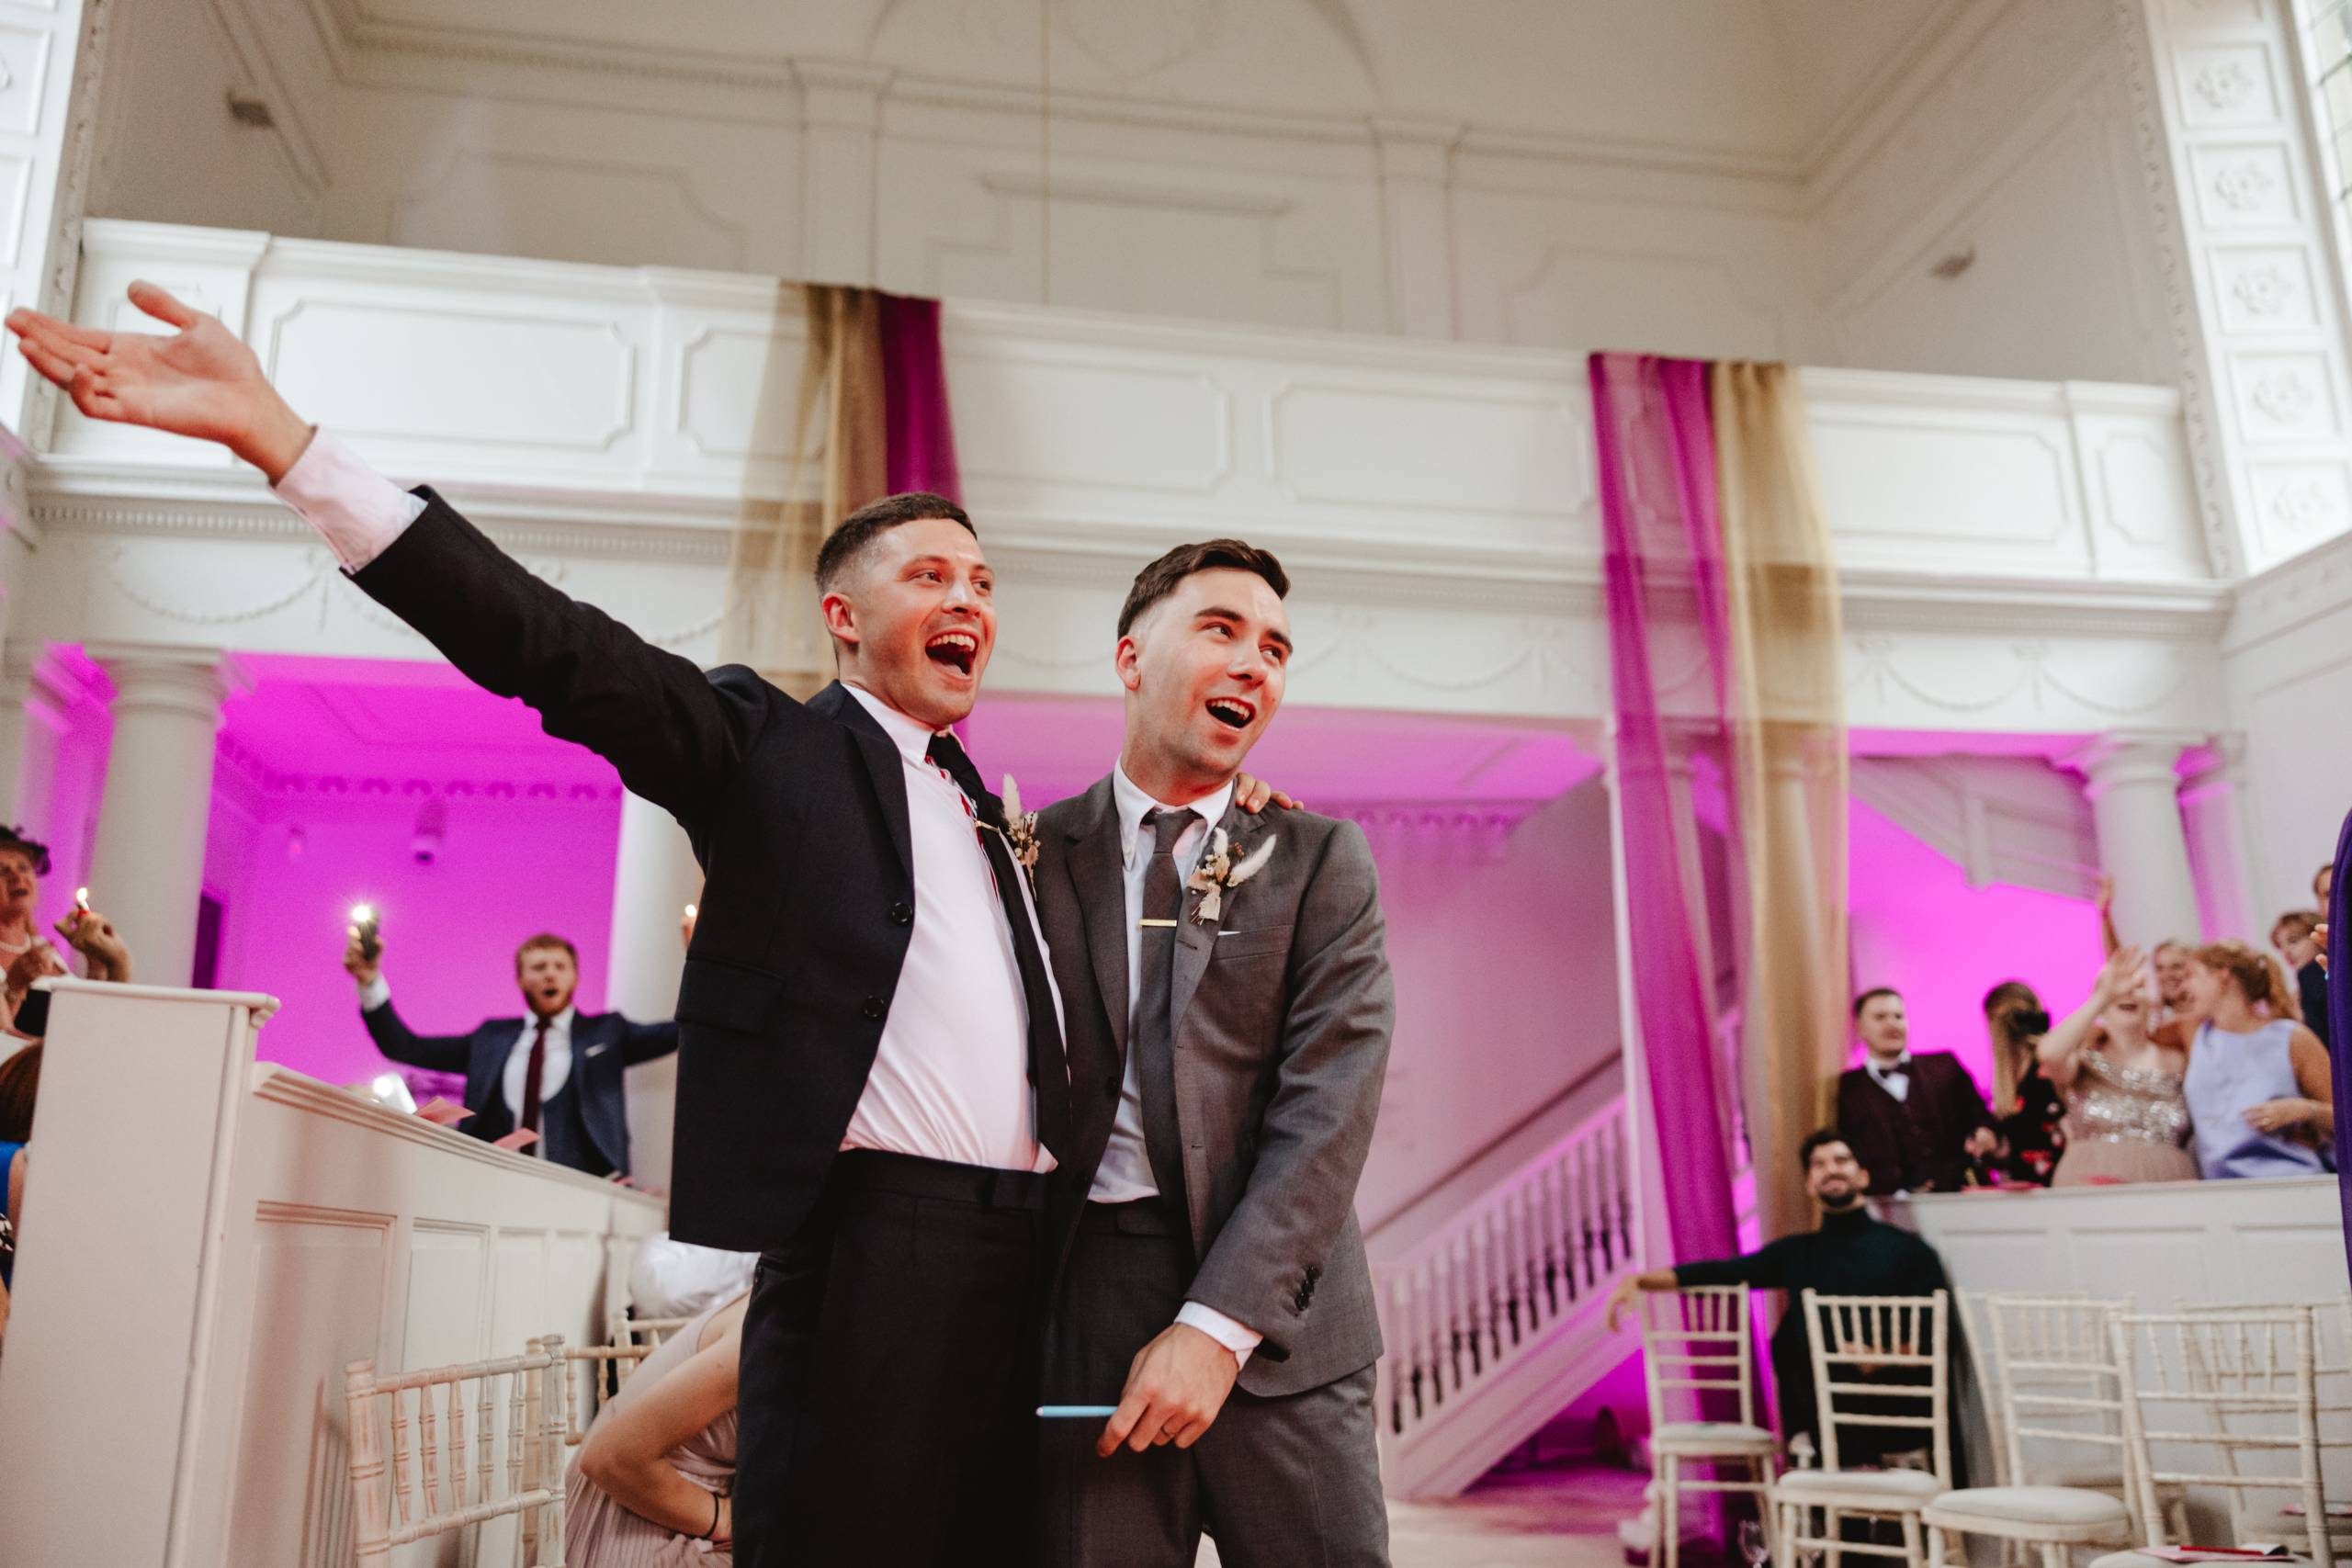 Two grooms in black suits celebrate in a white neoclassical chapel draped with colourful fabric